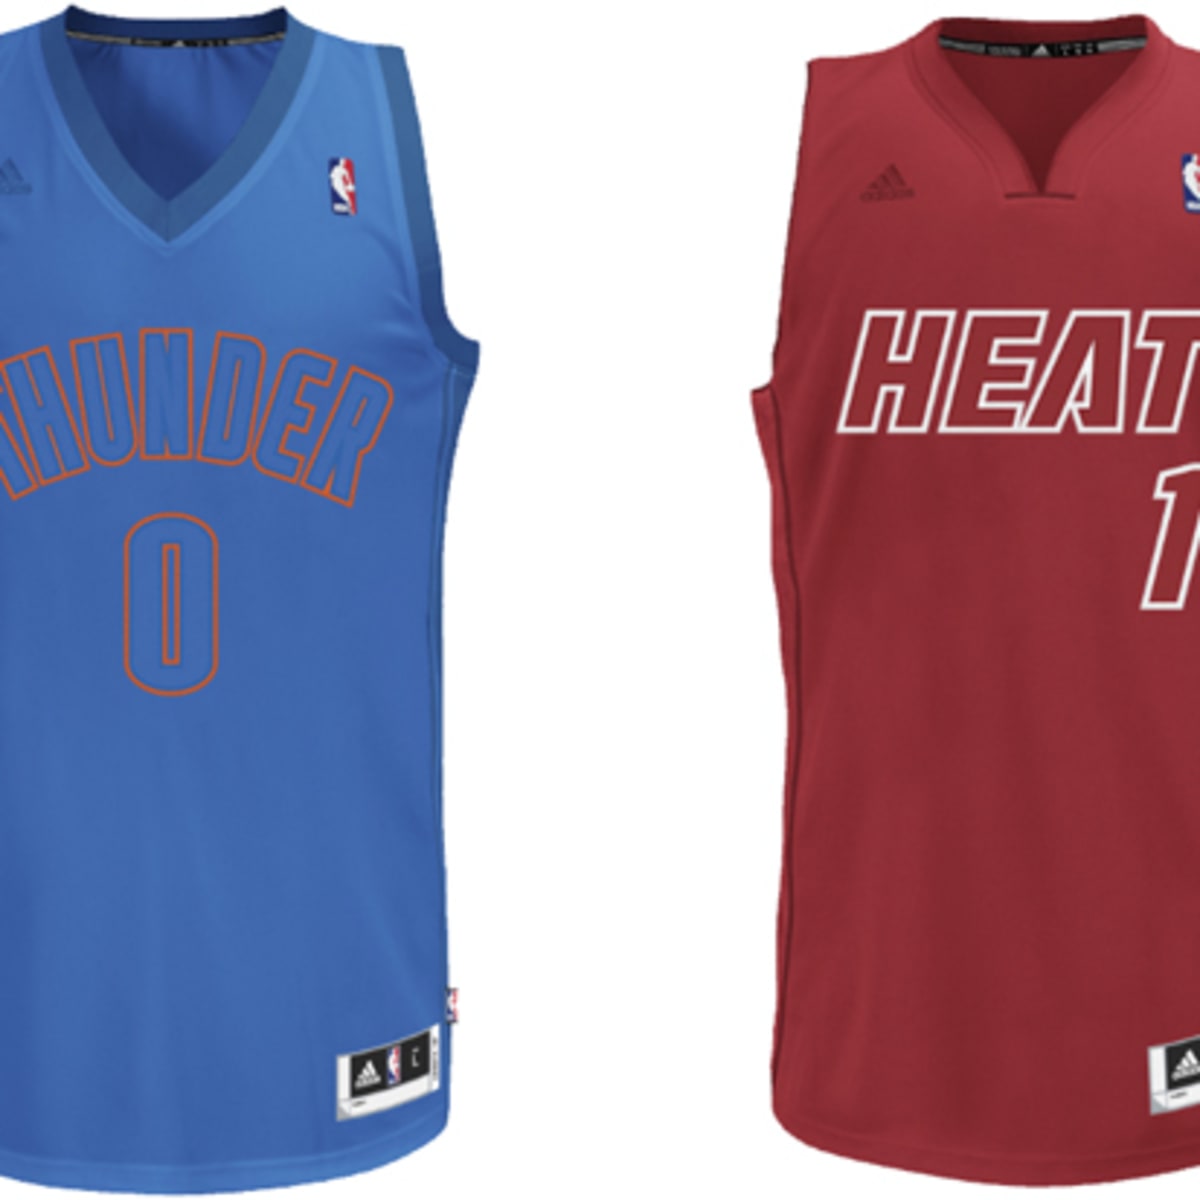 NBAs Christmas Day sleeved jersey designs by Adidas reportedly leak online 